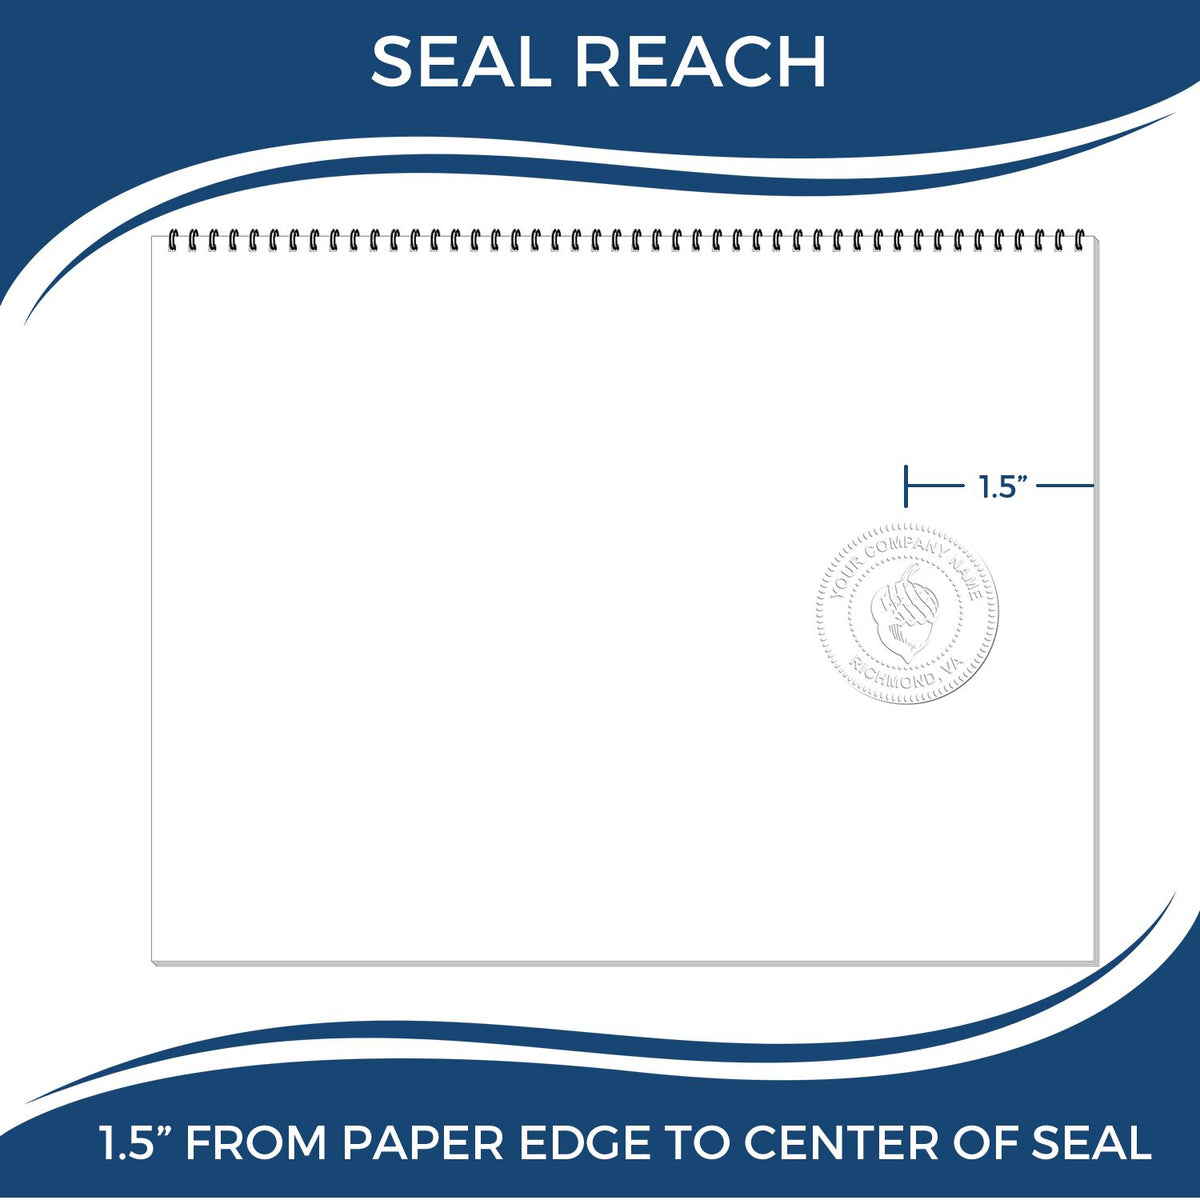 An infographic showing the seal reach which is represented by a ruler and a miniature seal image of the Kansas Desk Surveyor Seal Embosser